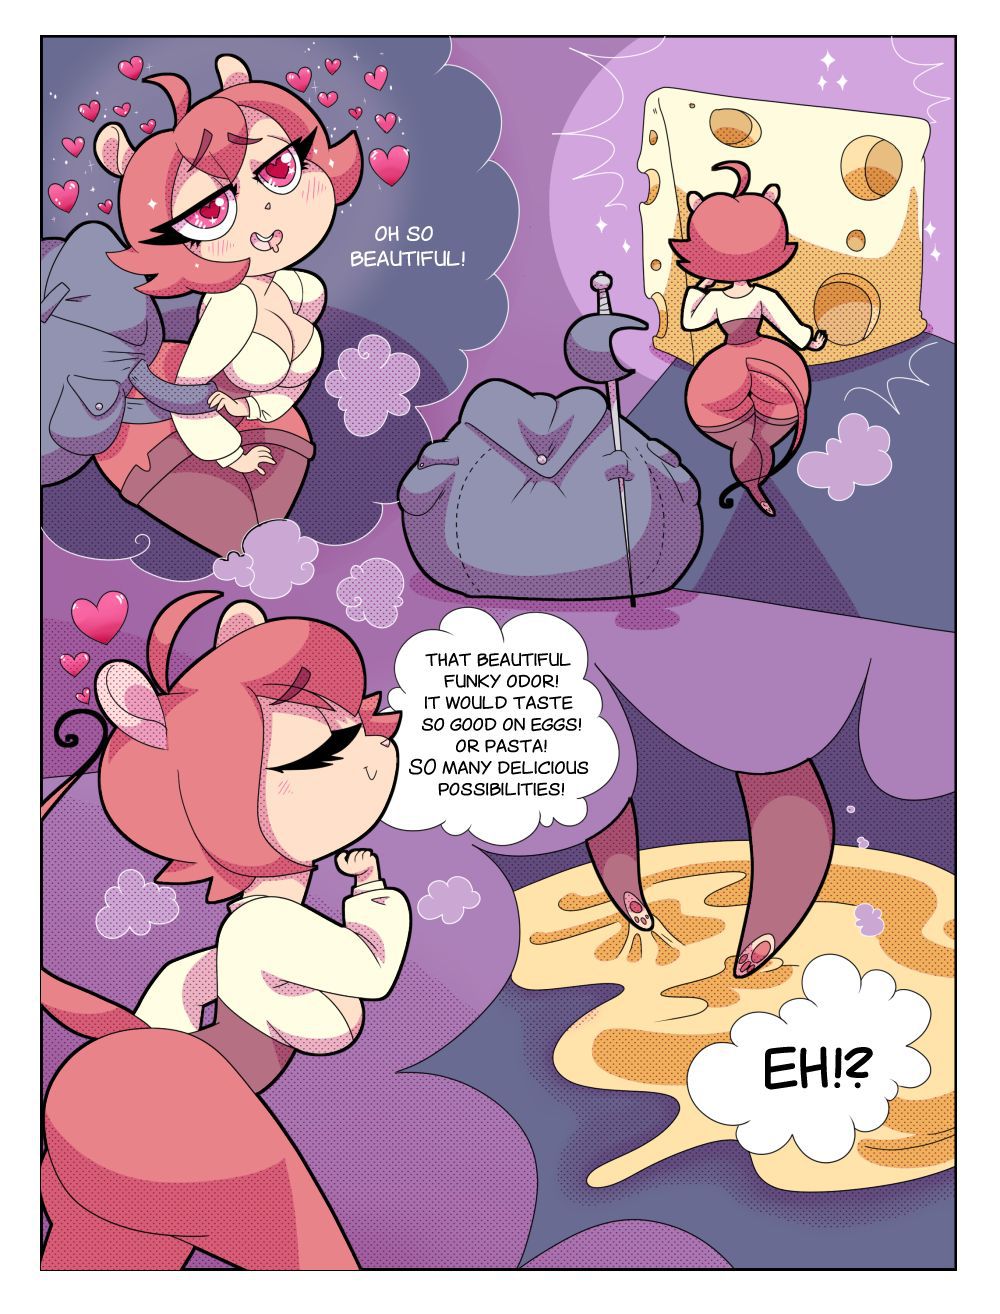 [Diddly-Dongs] - Sophie and Orion - ch1 - The Treacherous Pantry (ong) 3